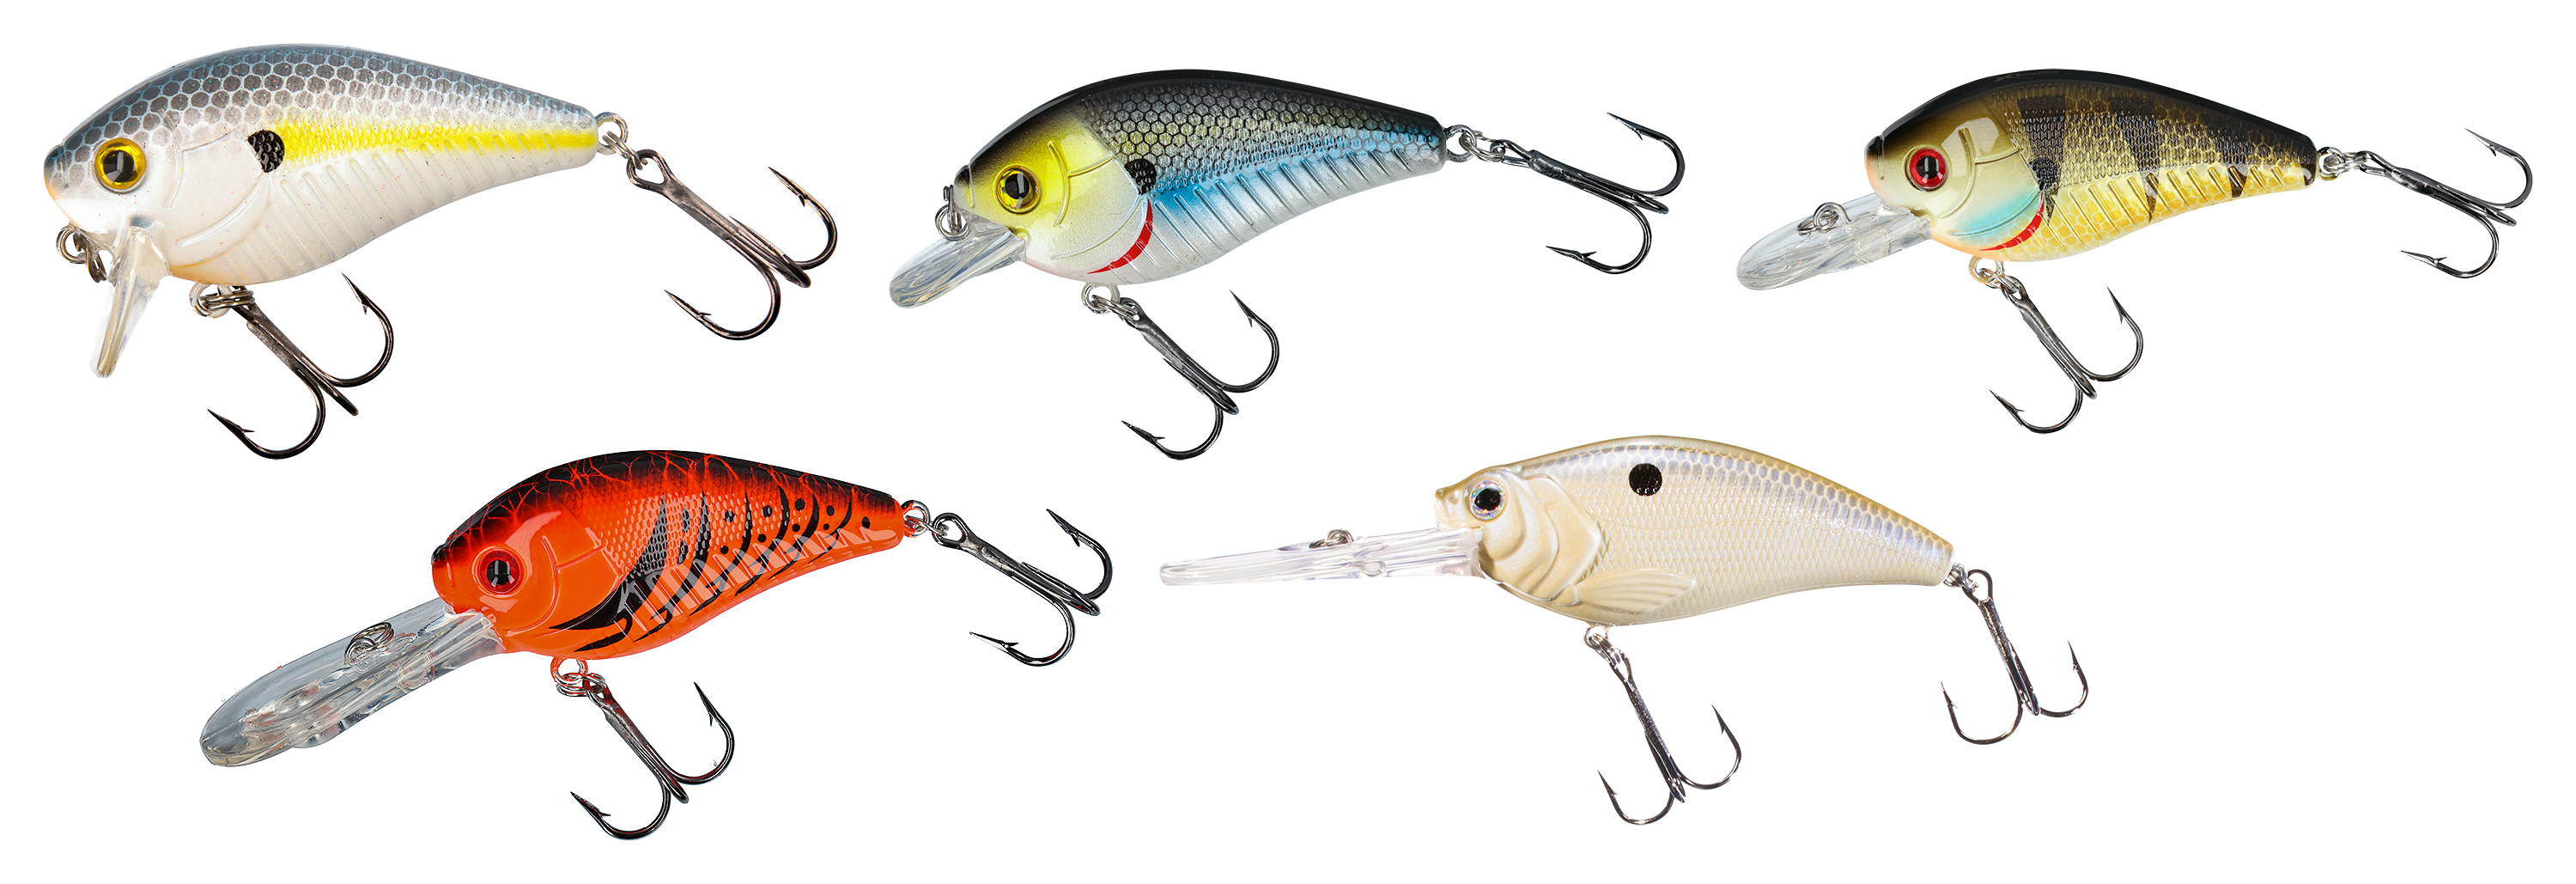 XPS Lures Kits on Sale